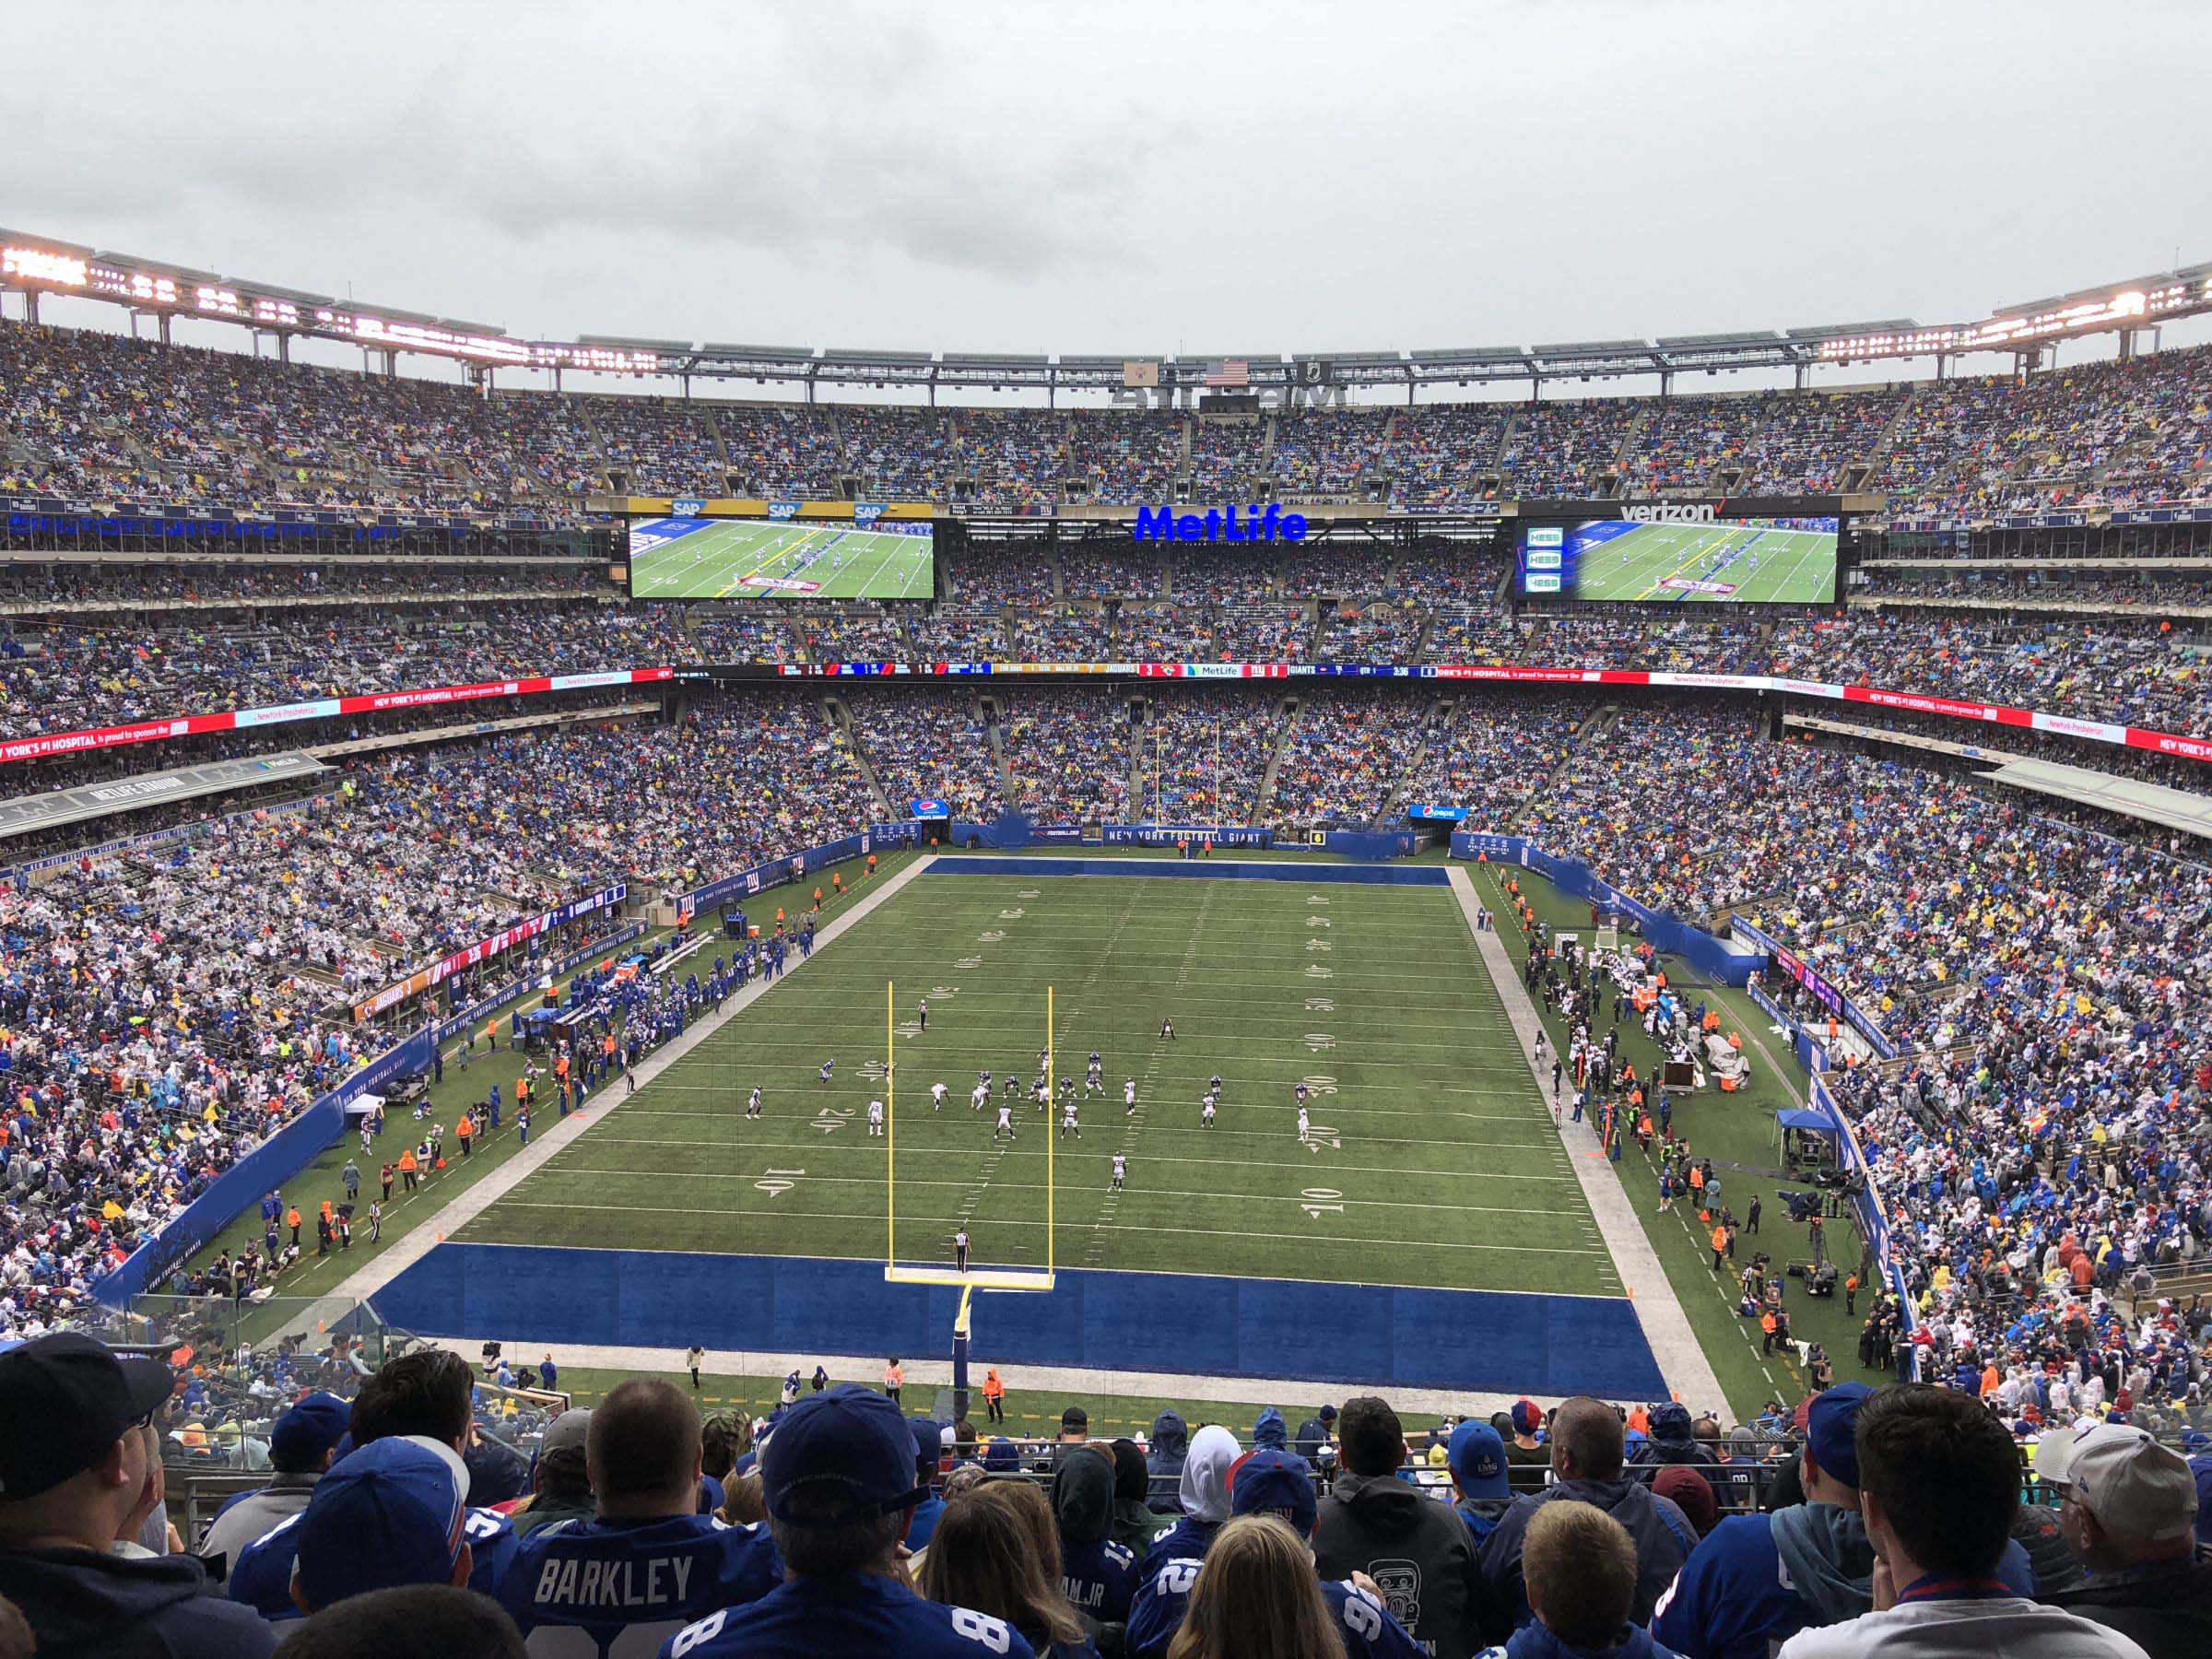 section 250b, row 11 seat view  for football - metlife stadium